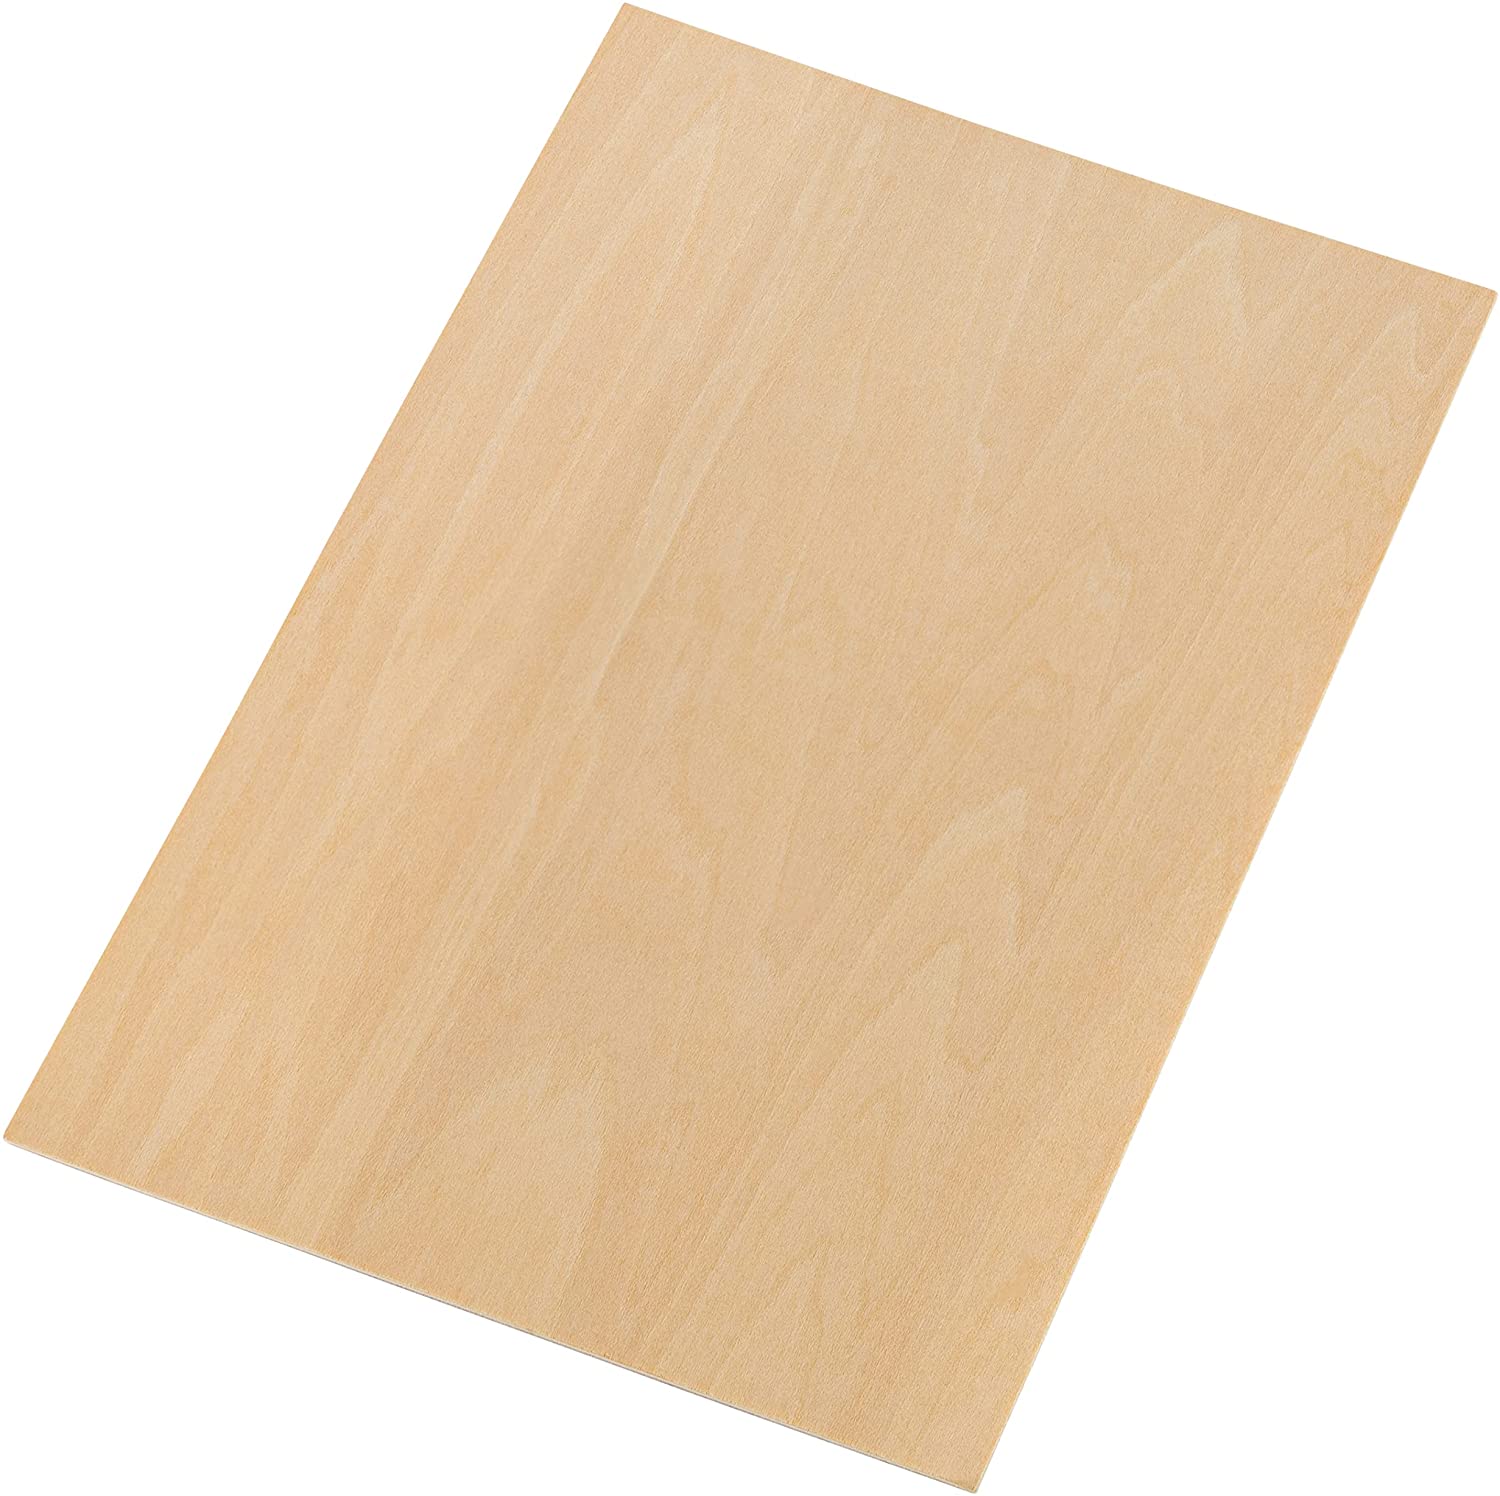 Hammont Basswood Sheets 12X8X116 (8 Pack) - Thin Plywood Sheets for Crafts - DIY Wood Boards School Projects